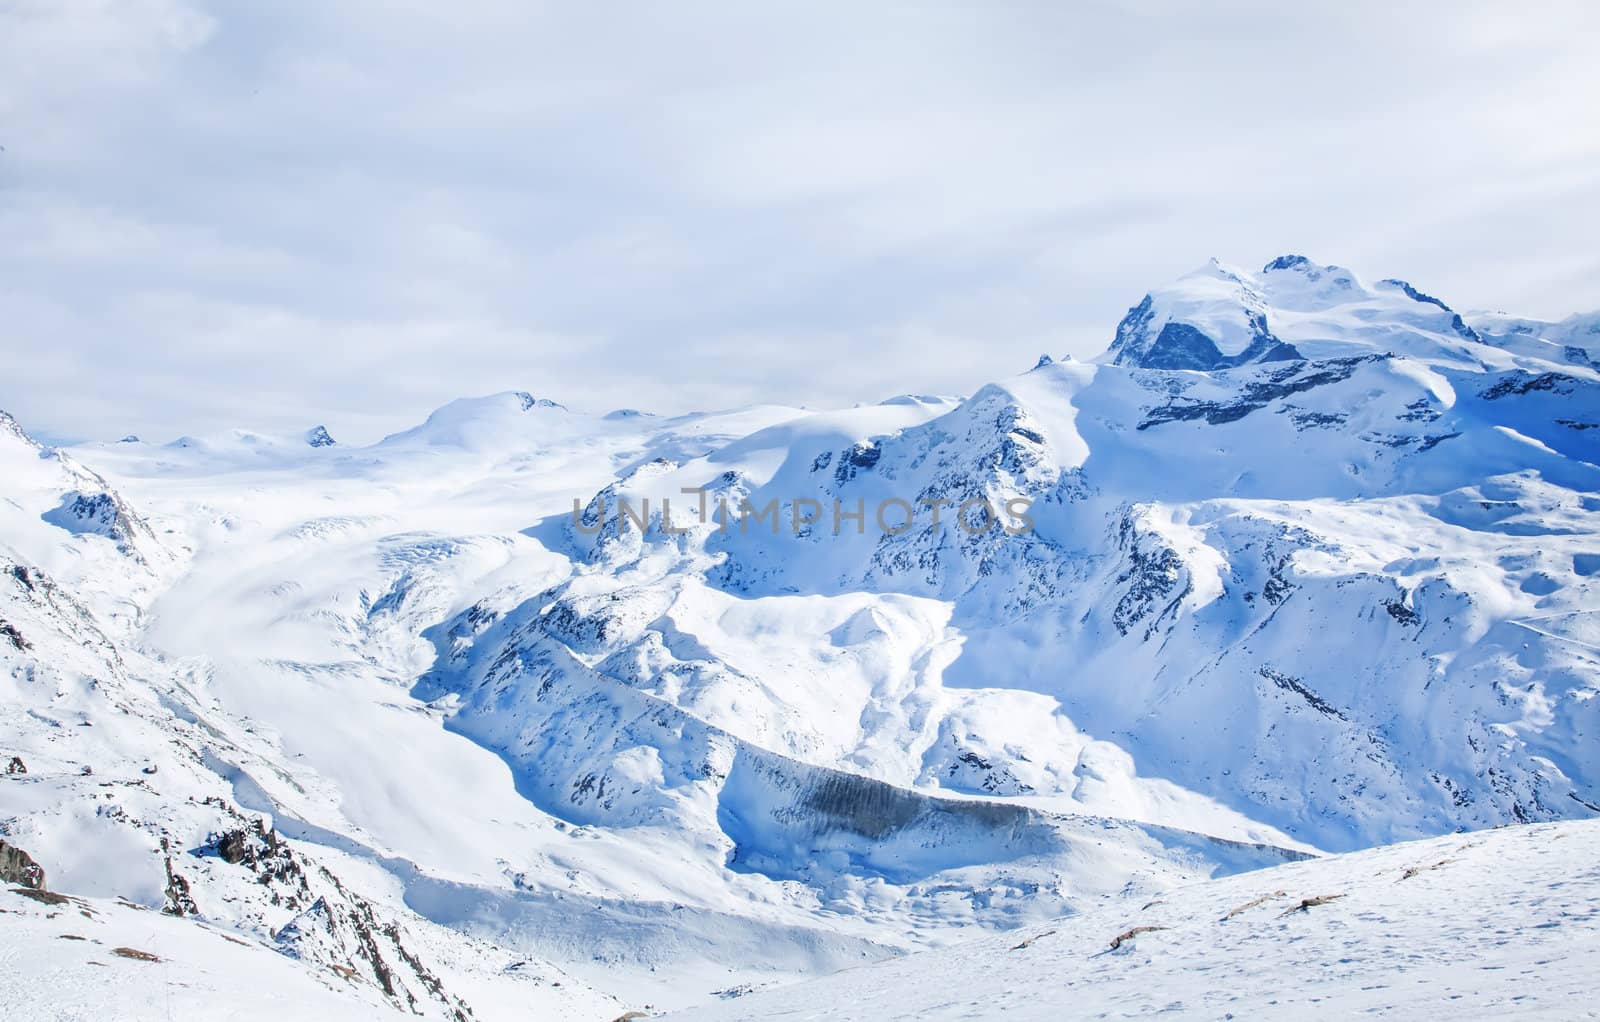 Winter blue and white landscape on Switzerland hills in February